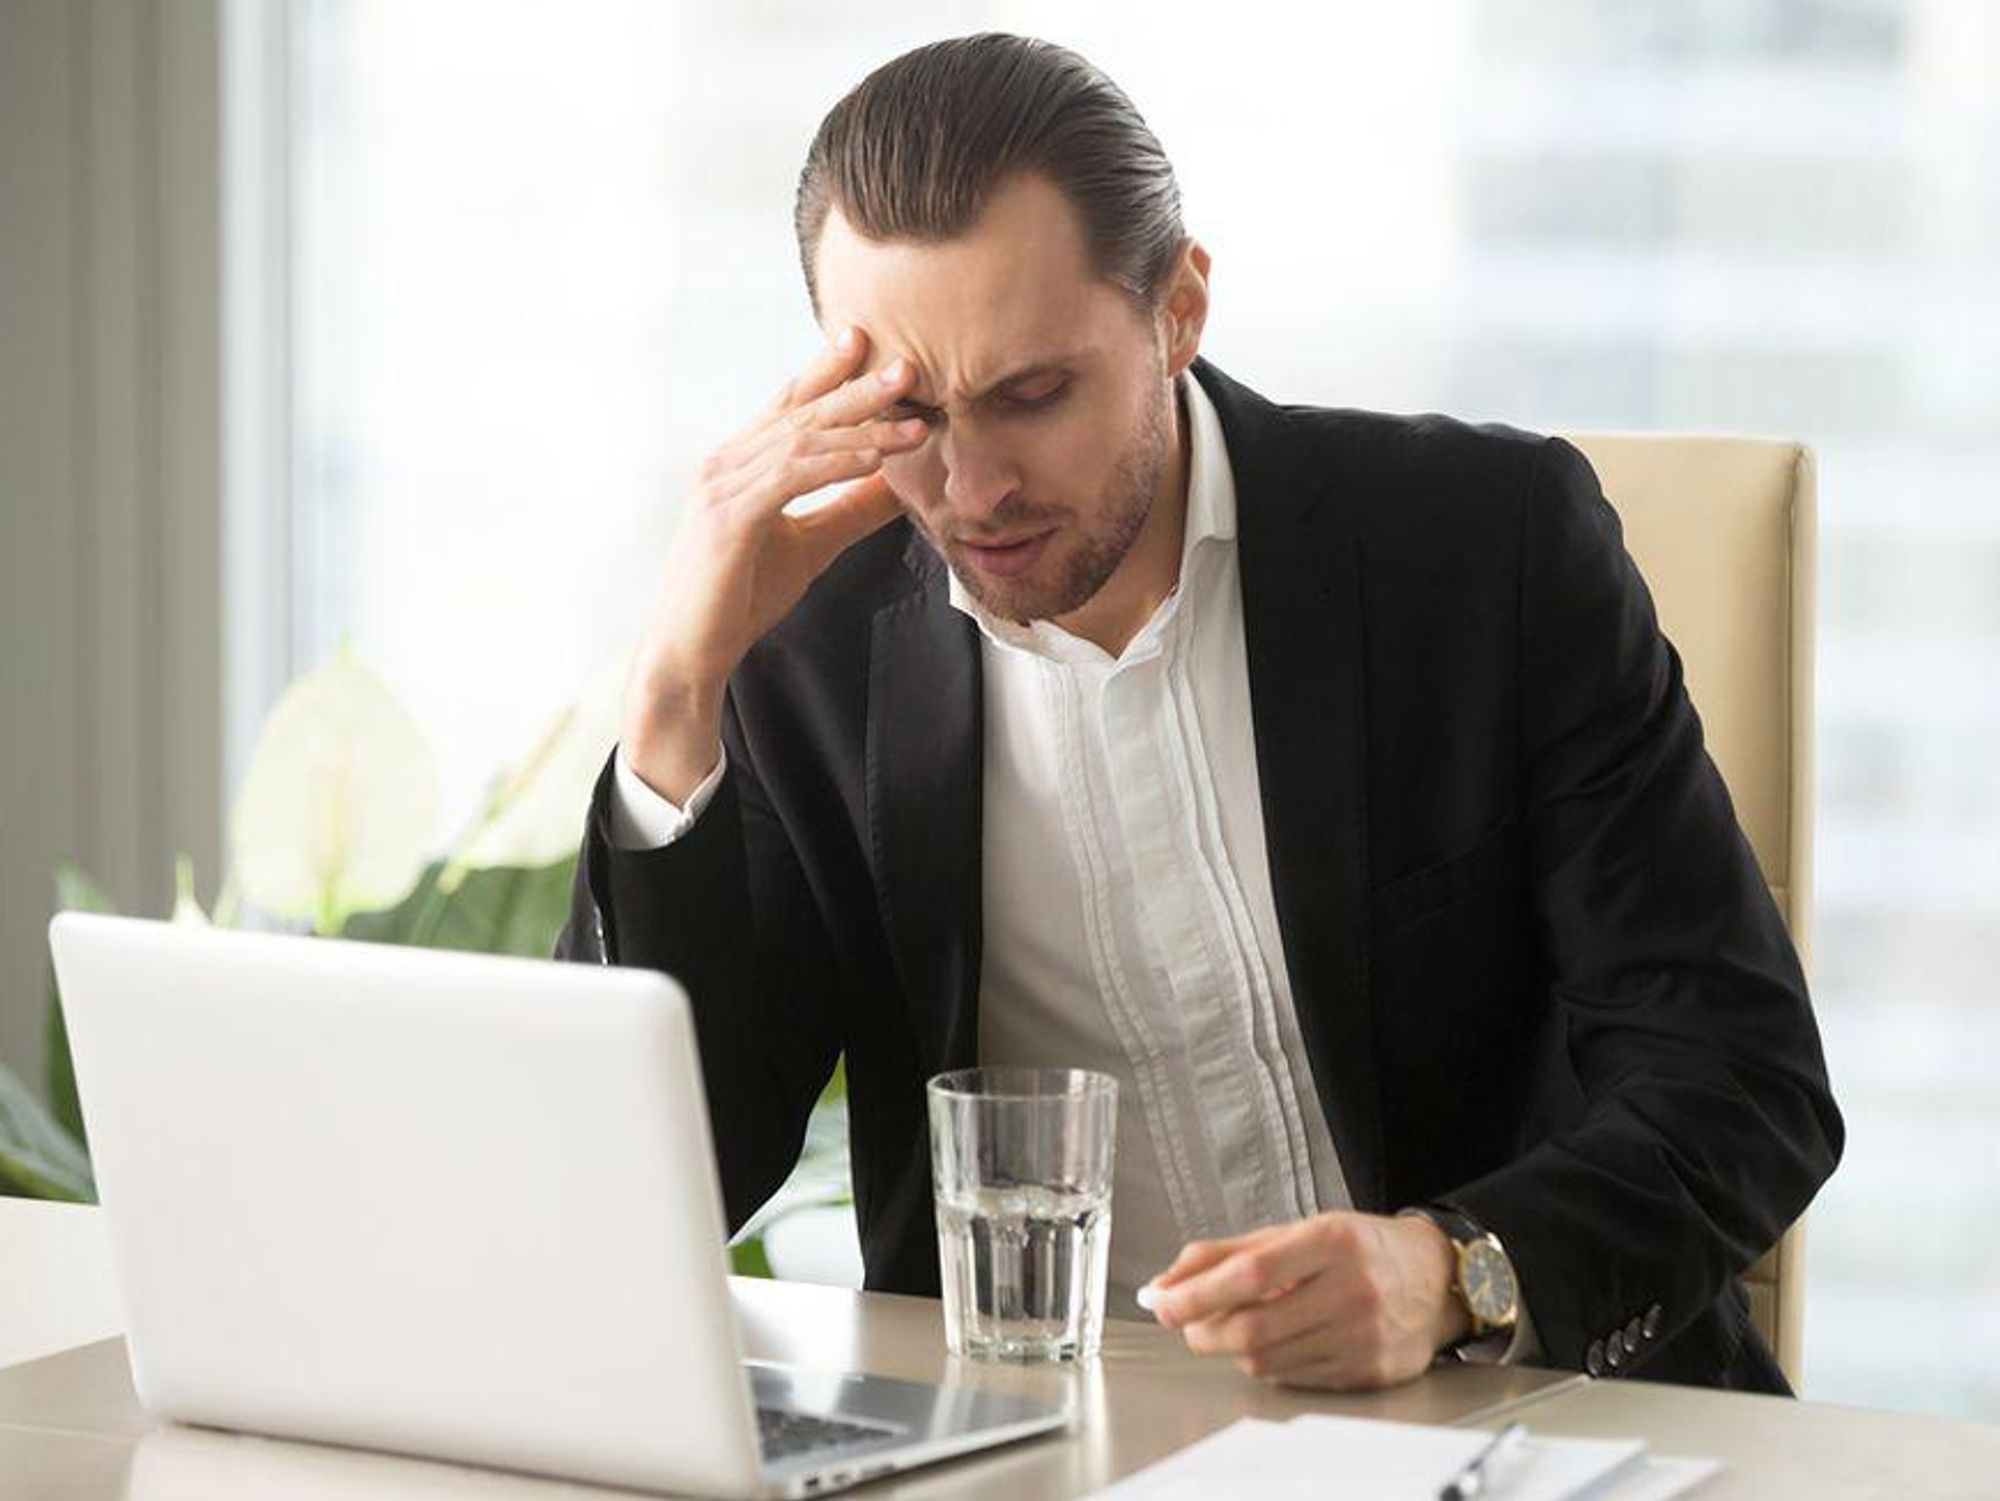 An executive working long hours shows signs of stress.